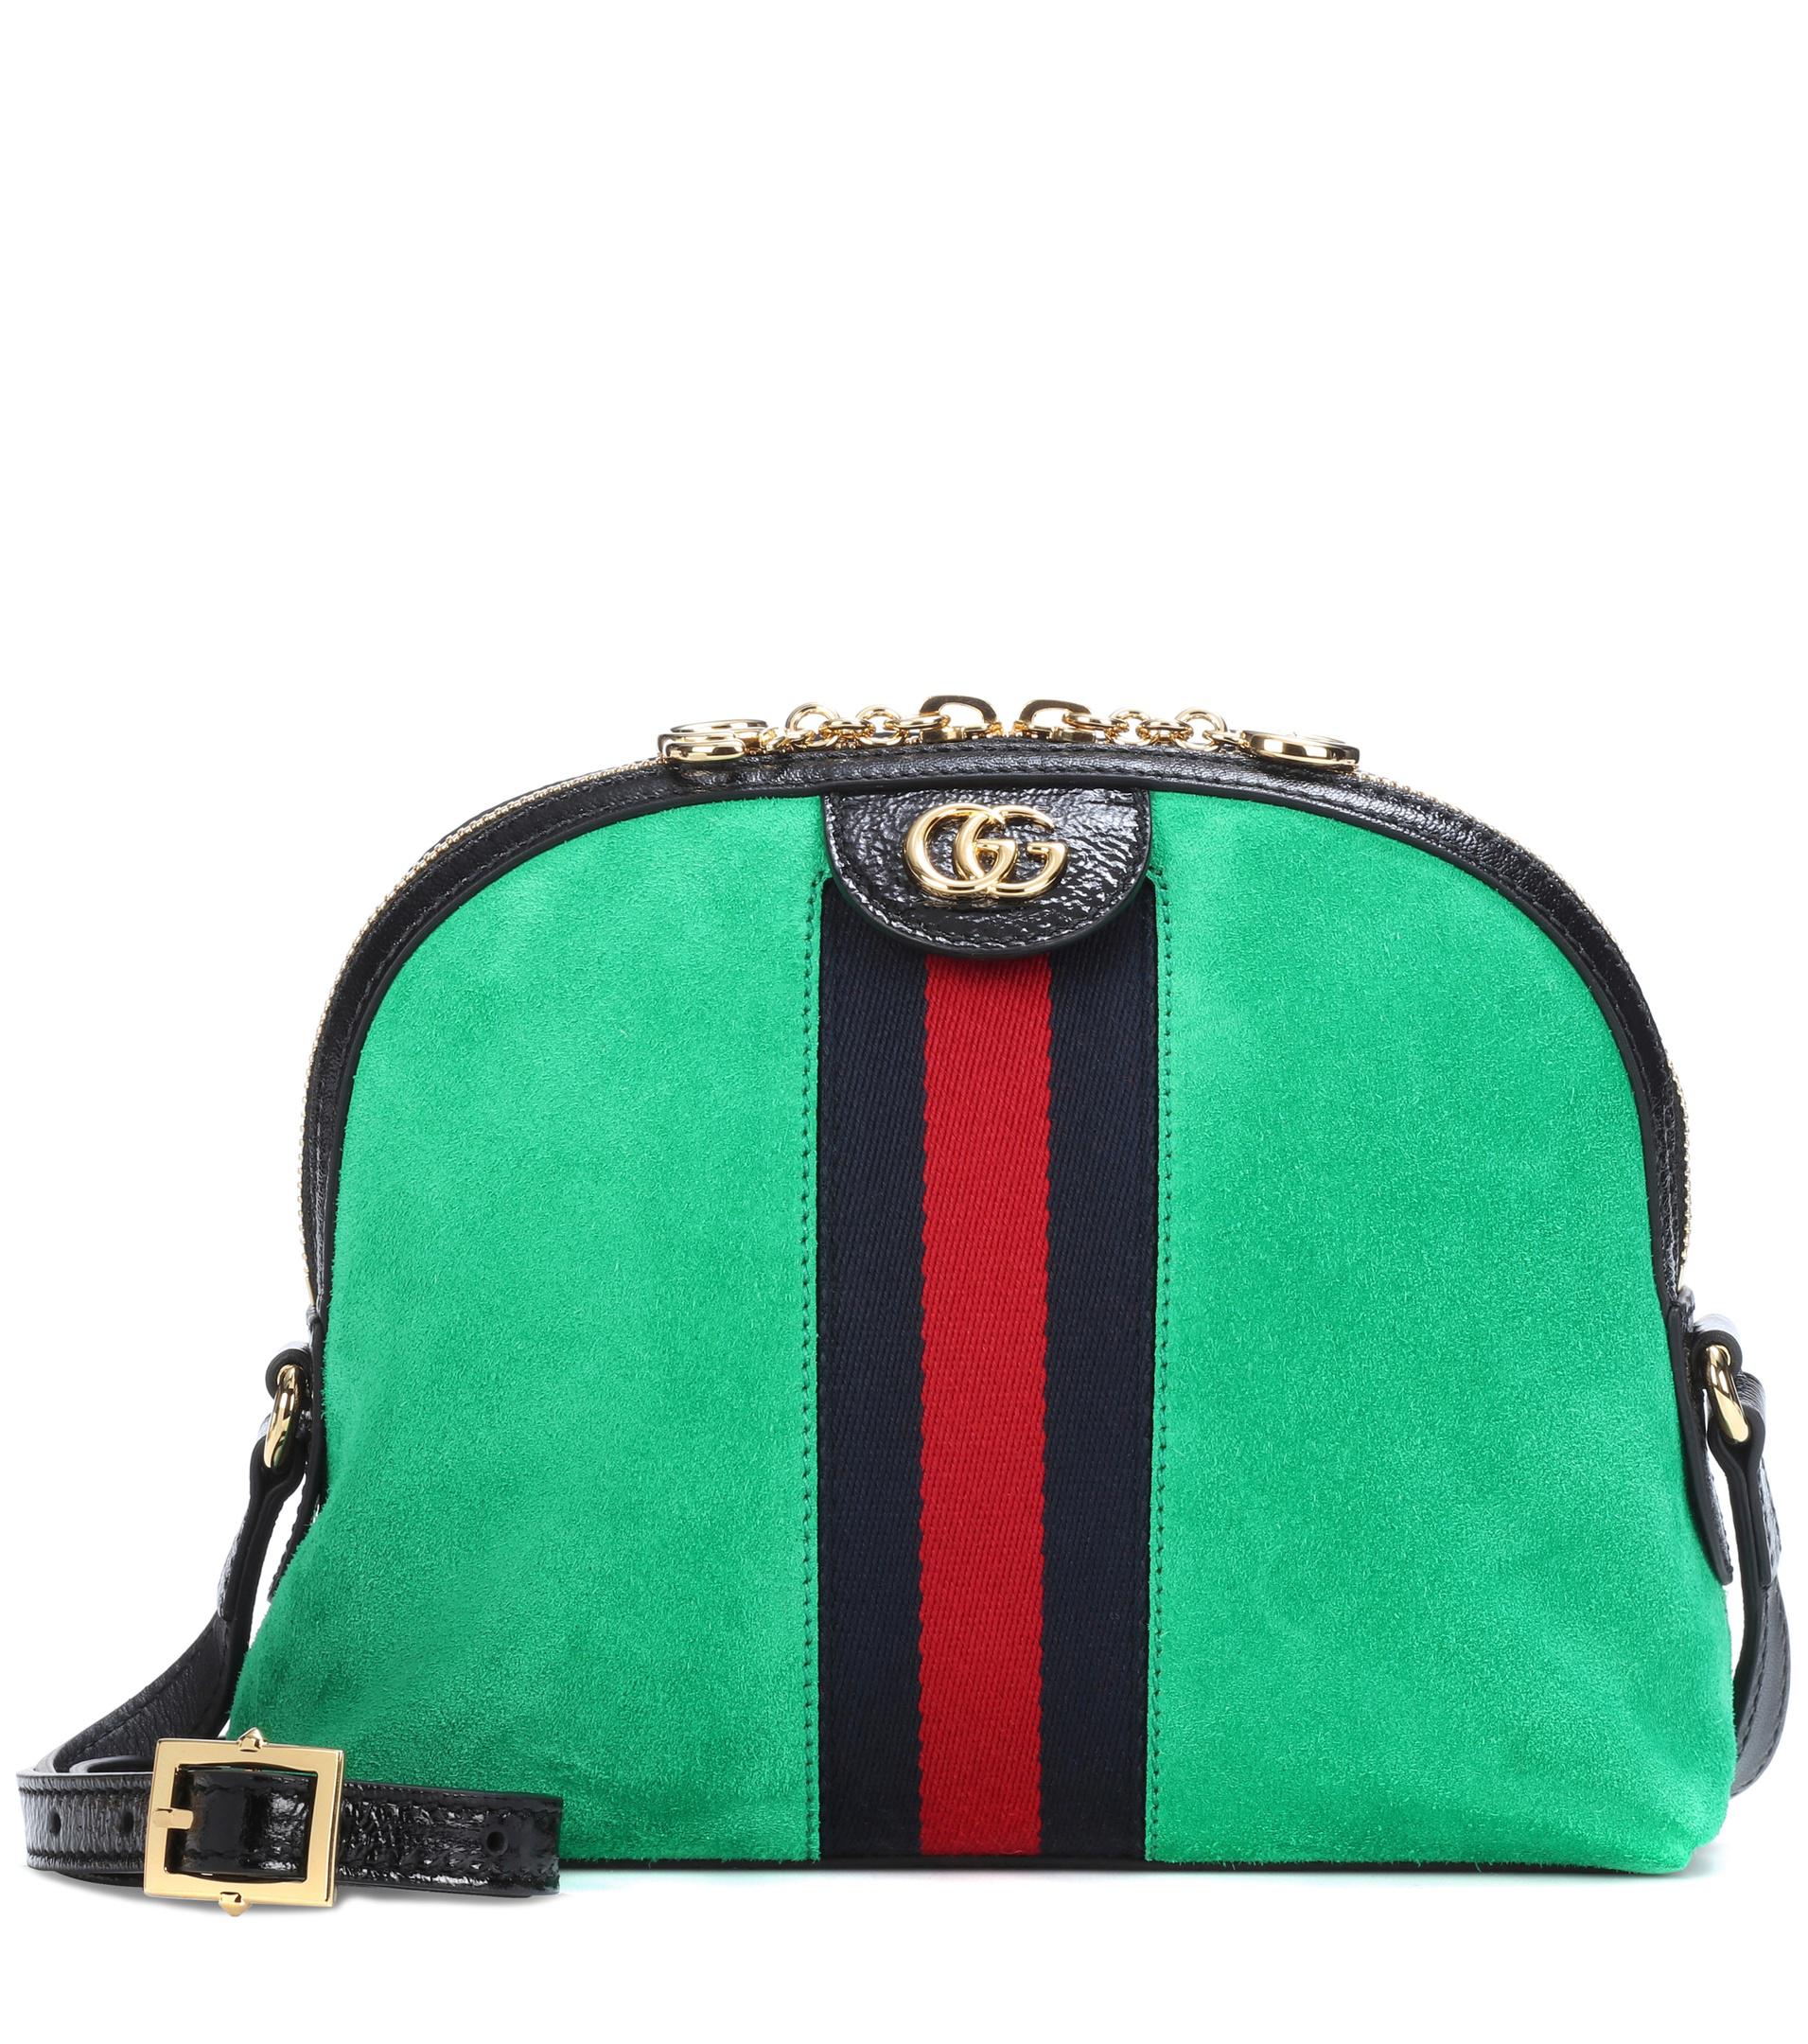 Gucci Ophidia Suede Crossbody Bag in Green - Lyst